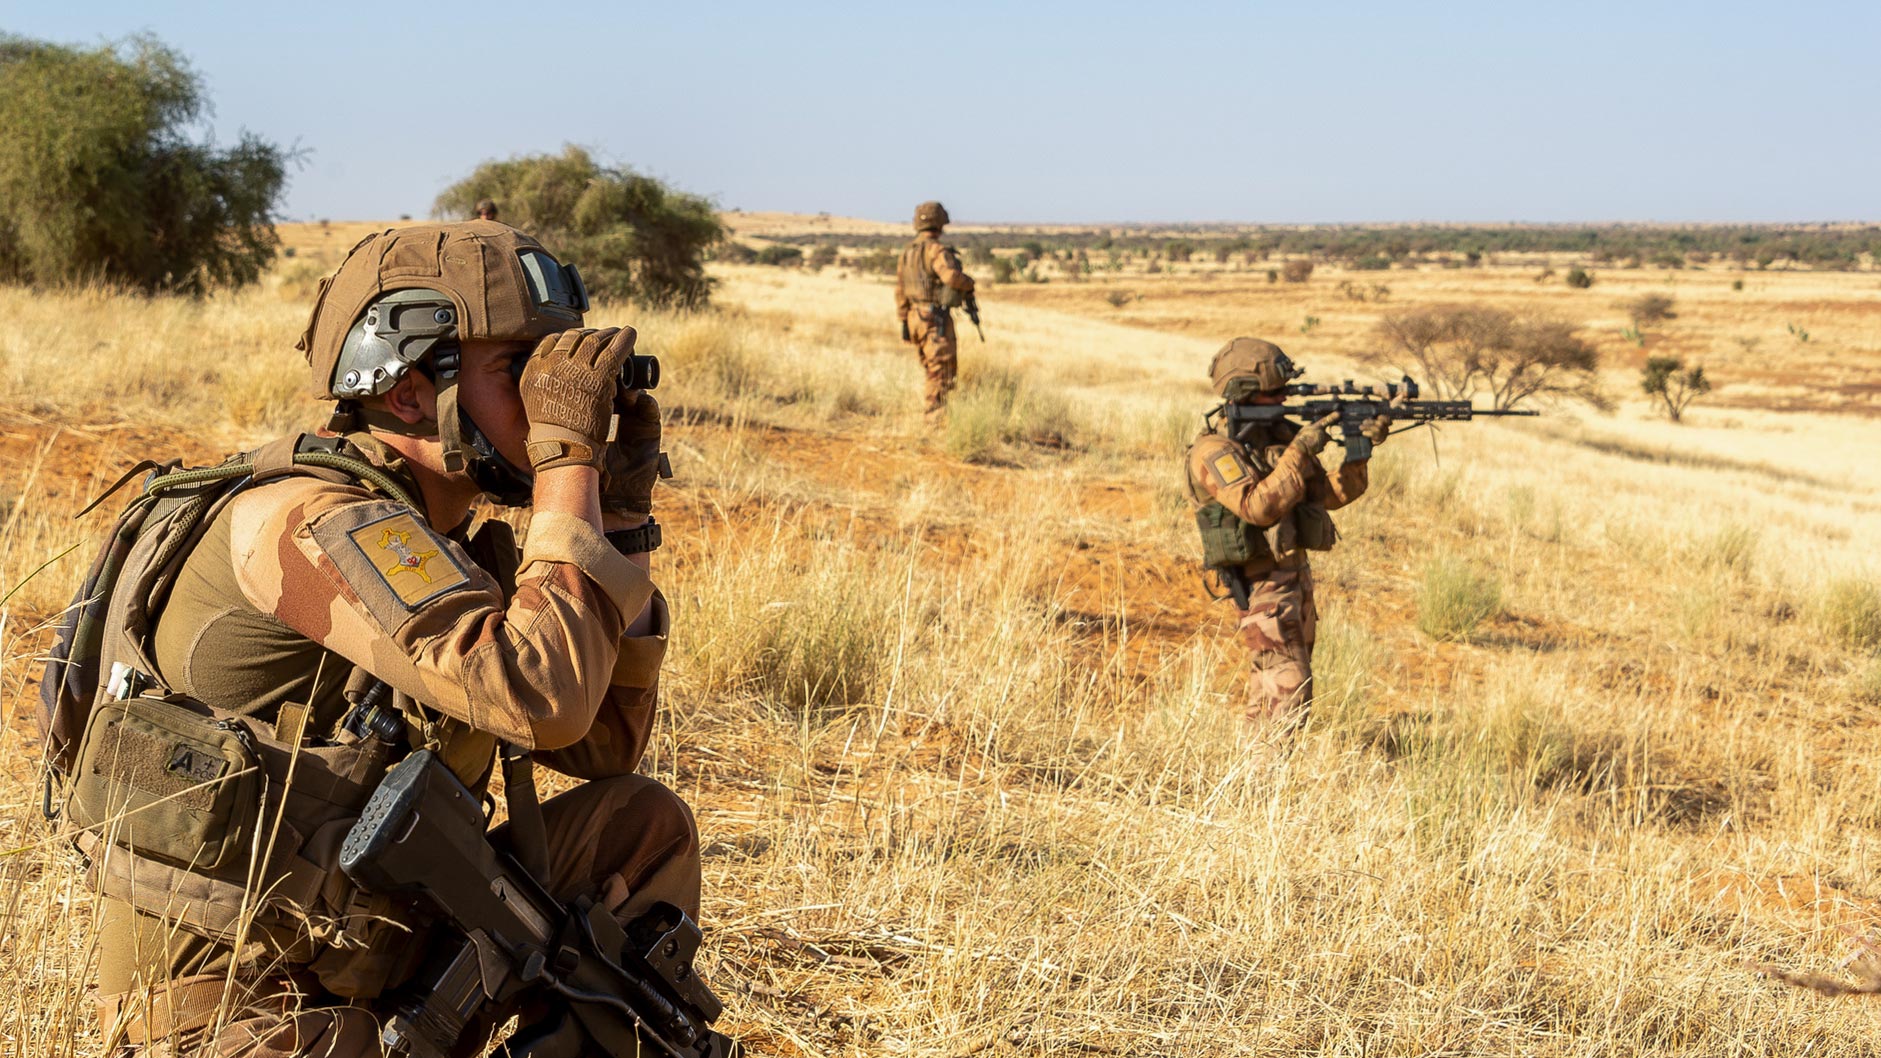 French soldiers deployed to Operation Barkhane in the Sahel